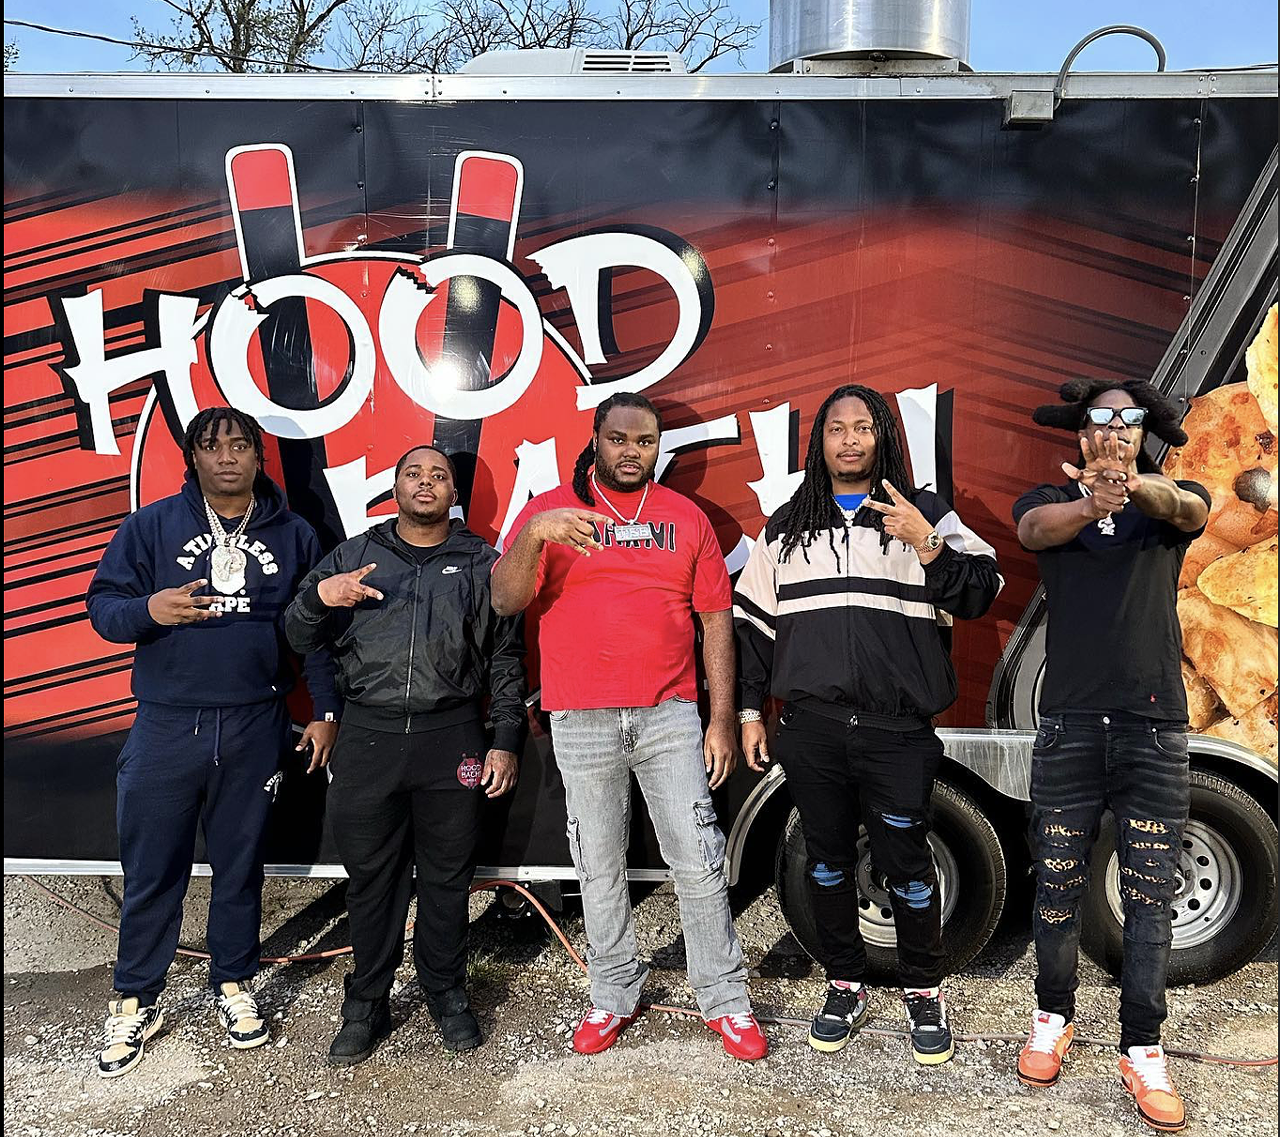 Hoodbachi Grill
instagram.com/hoodbachigrill
This 100% halal eatery fuses together soul food flavors with Japanese-inspired Hibachi entrees. The truck went on a tour throughout the eastern half of the country earlier this year and racked up close to 50,000 followers on Instagram. Normally the truck is located in Detroit’s Brightmoor neighborhood at 21509 Fenkell Ave., open noon-8 p.m. Monday-Saturday.